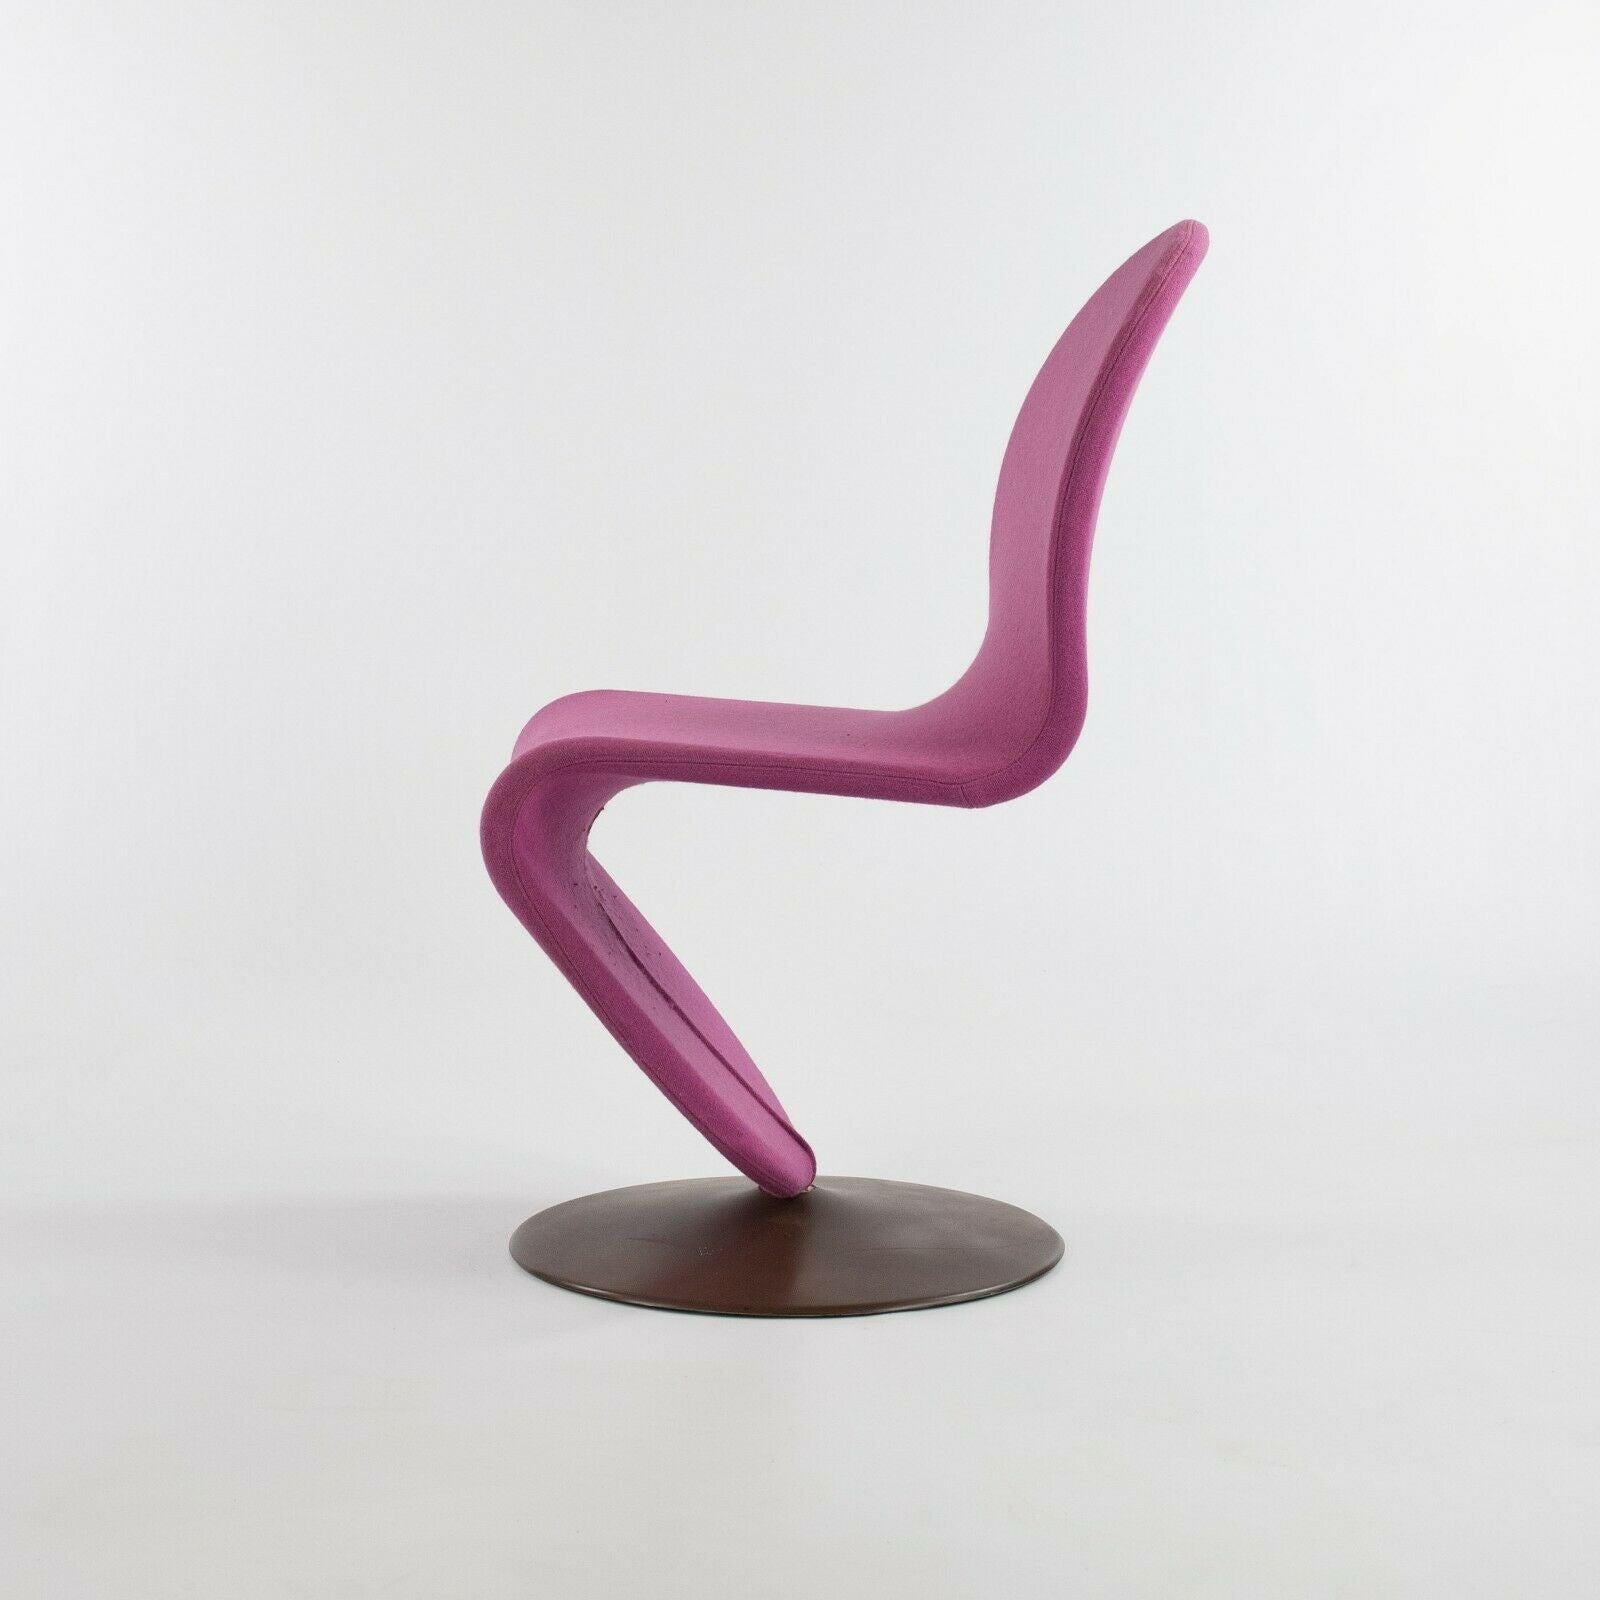 1970s Verner Panton for Fritz Hansen 1-2-3 Dining Side Chair in Magenta Fabric In Good Condition For Sale In Philadelphia, PA